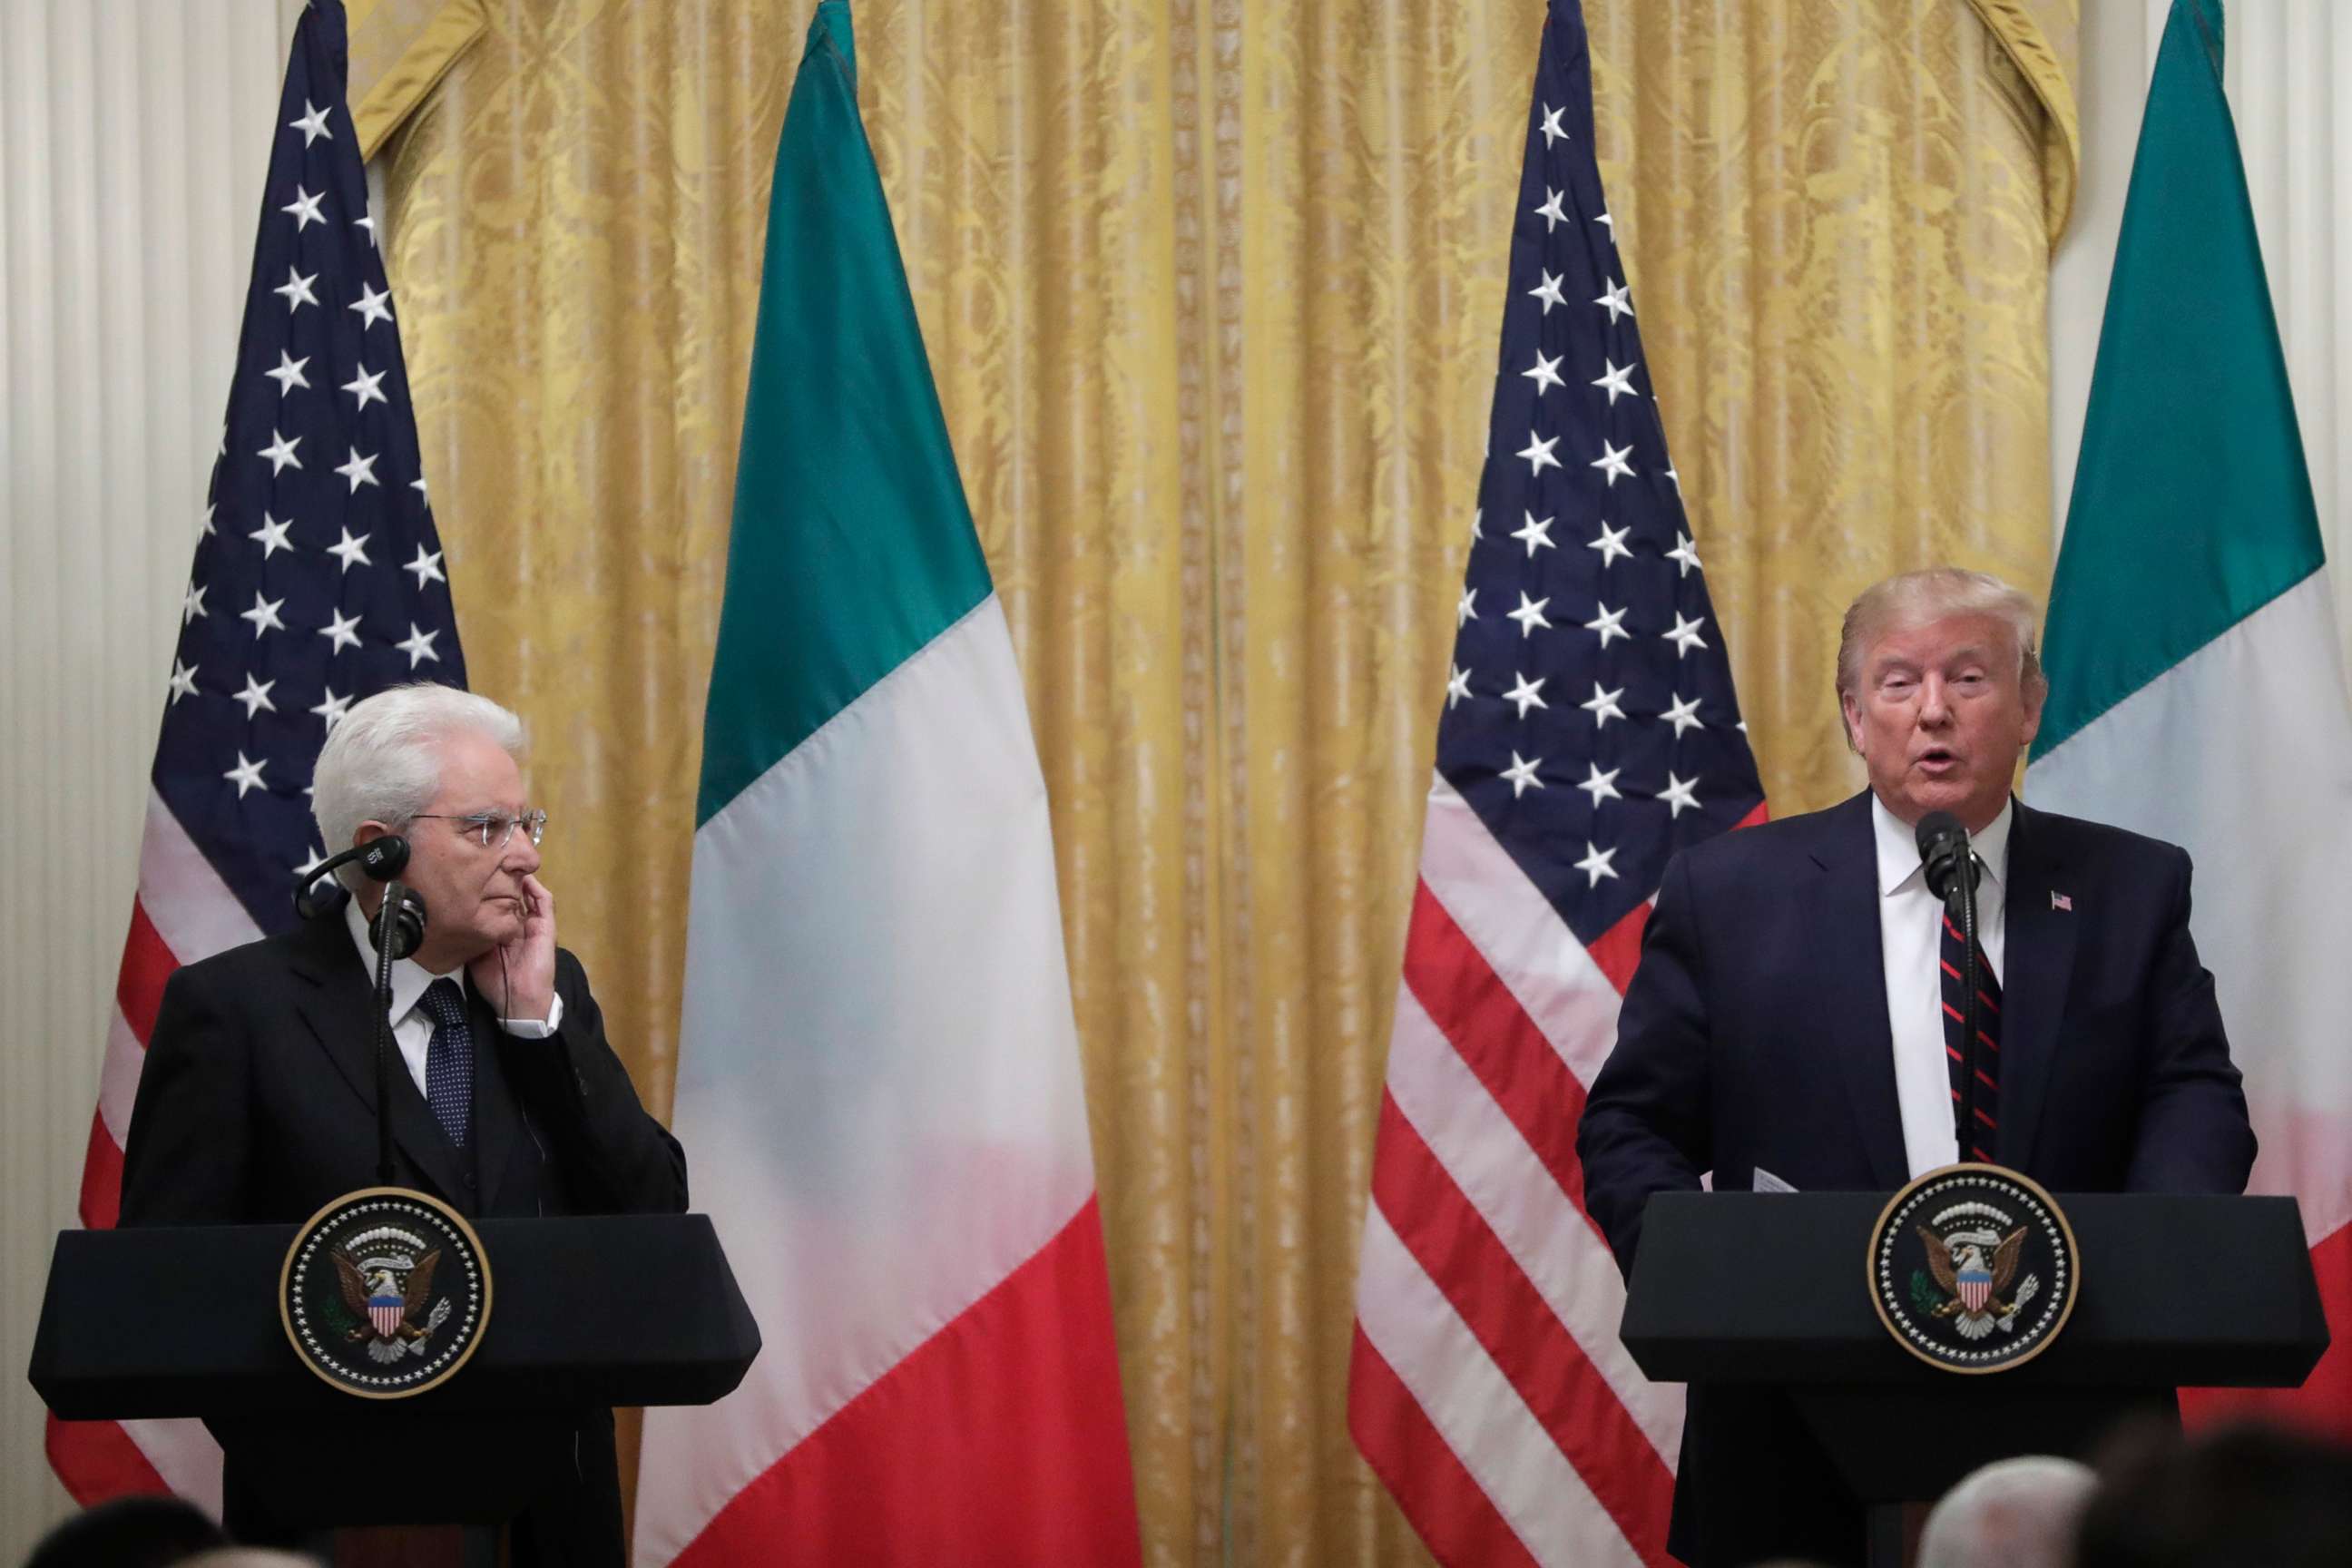 PHOTO: President Donald Trump speaks during a news conference with the Italian President Sergio Mattarella at the White House in Washington, Oct. 16, 2019.